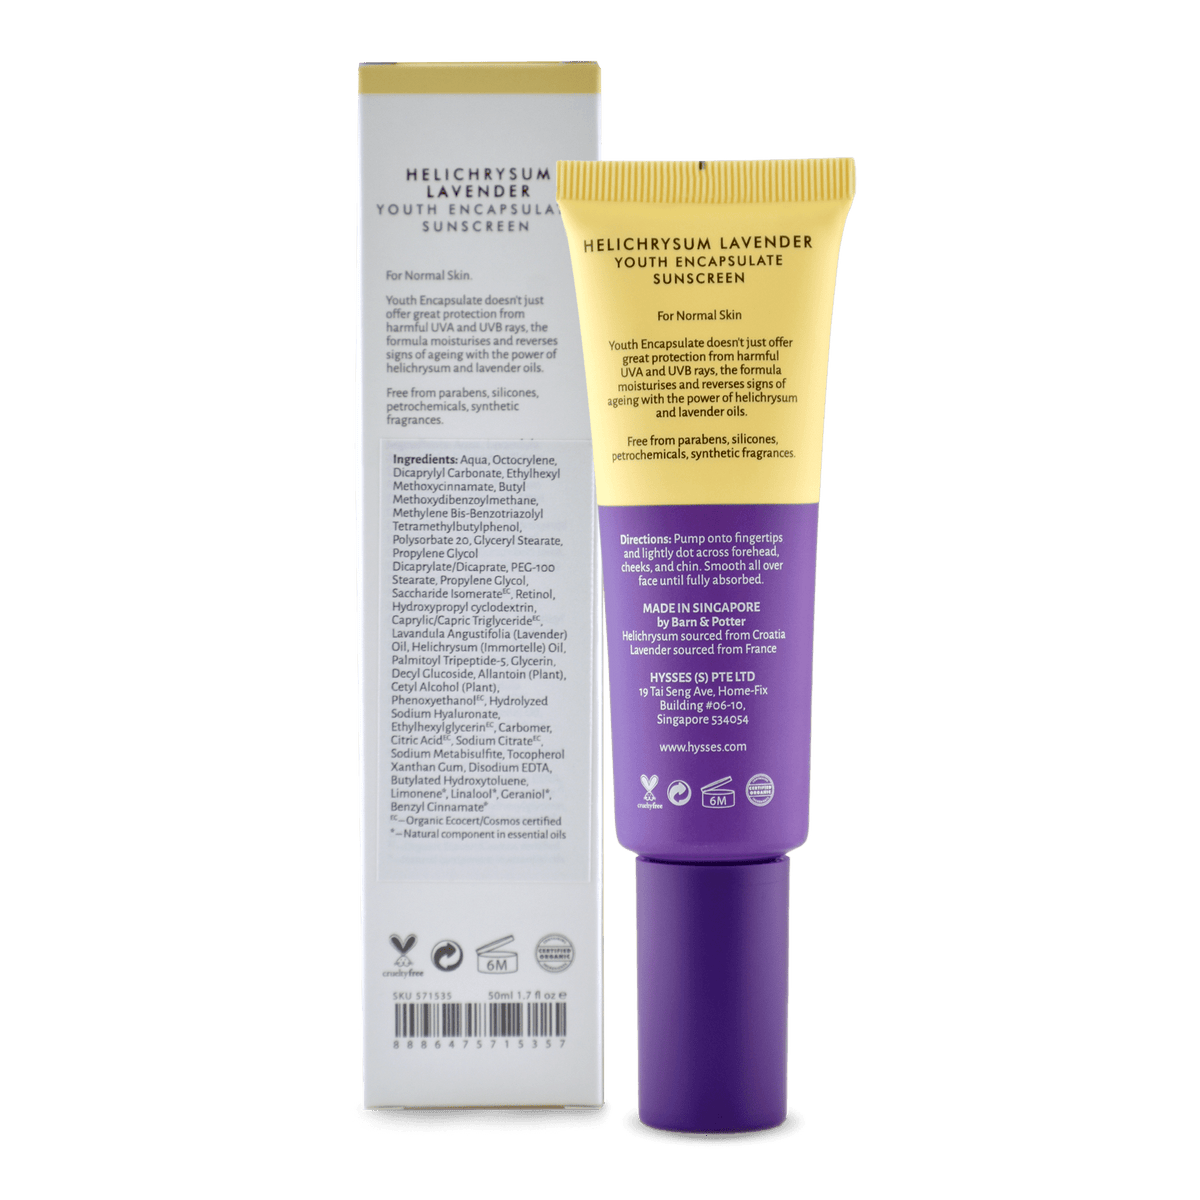 Hysses Face Care Youth Encapsulate Sunscreen Helichrysum Lavender SPF 40 / PA++